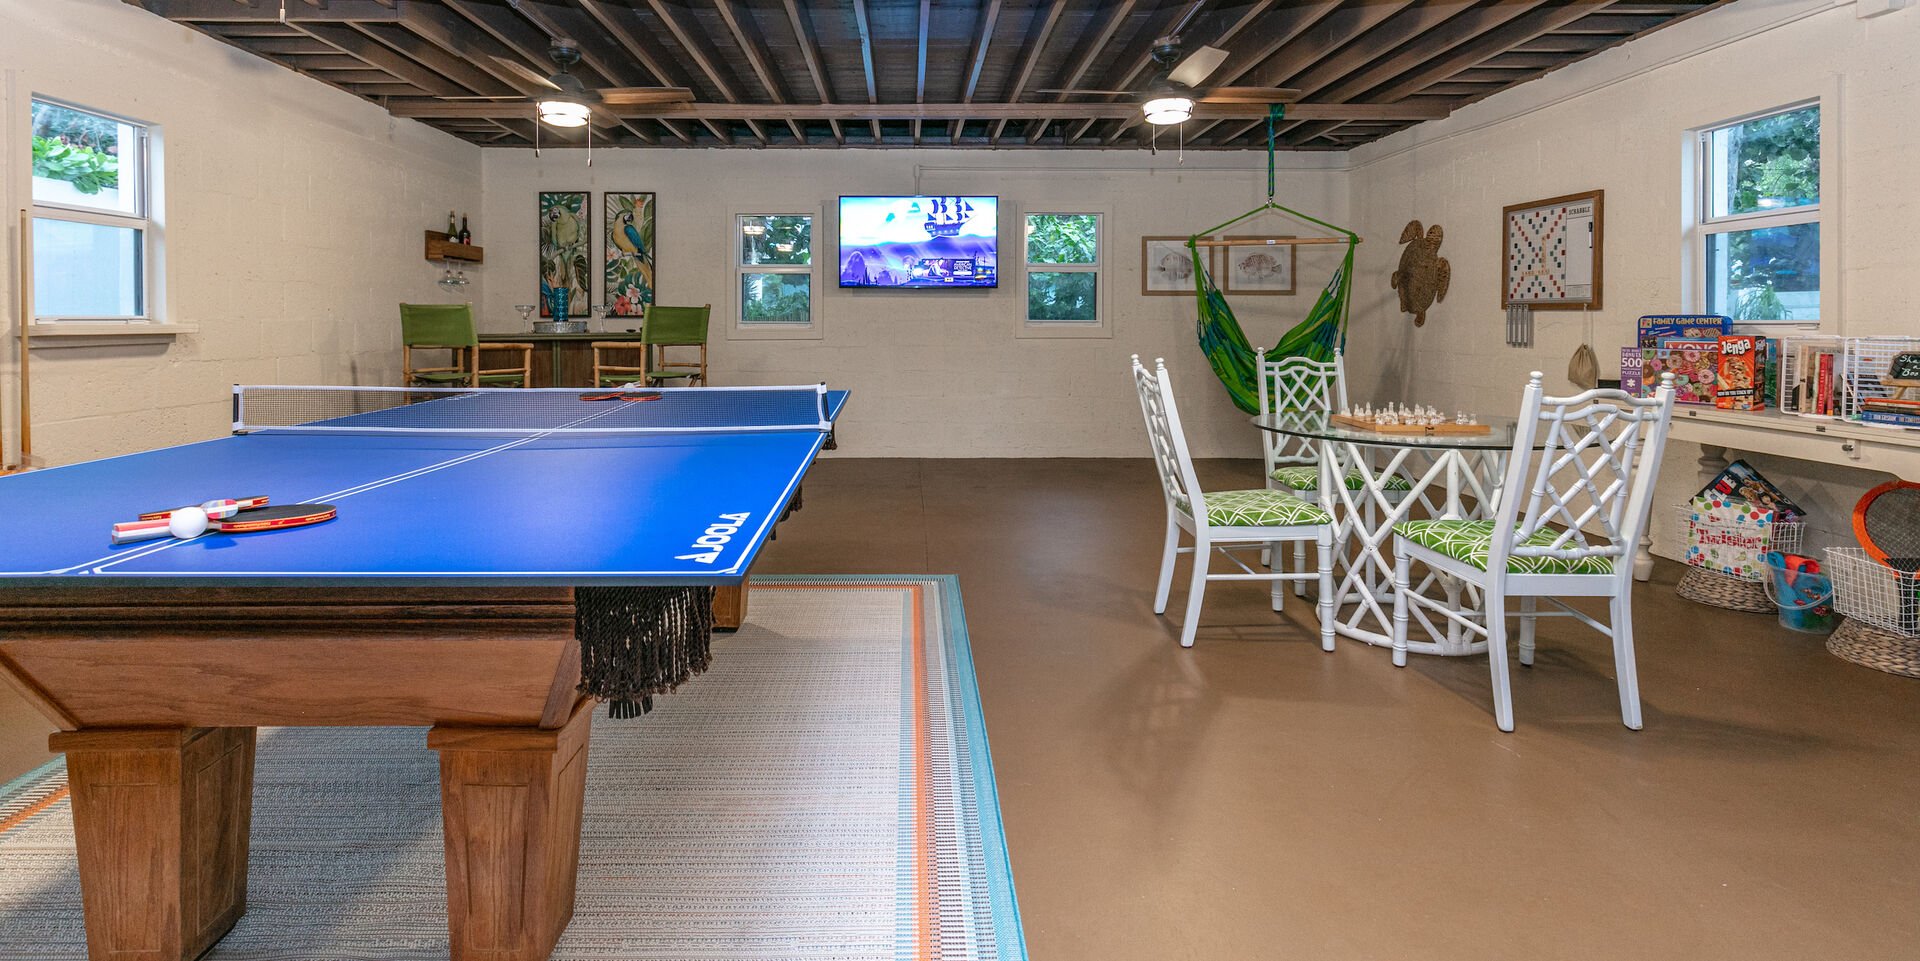 Game room includes a ping-pong table, a pool table, Smart TV, a mini bar, a board game area, and plenty of games to play!